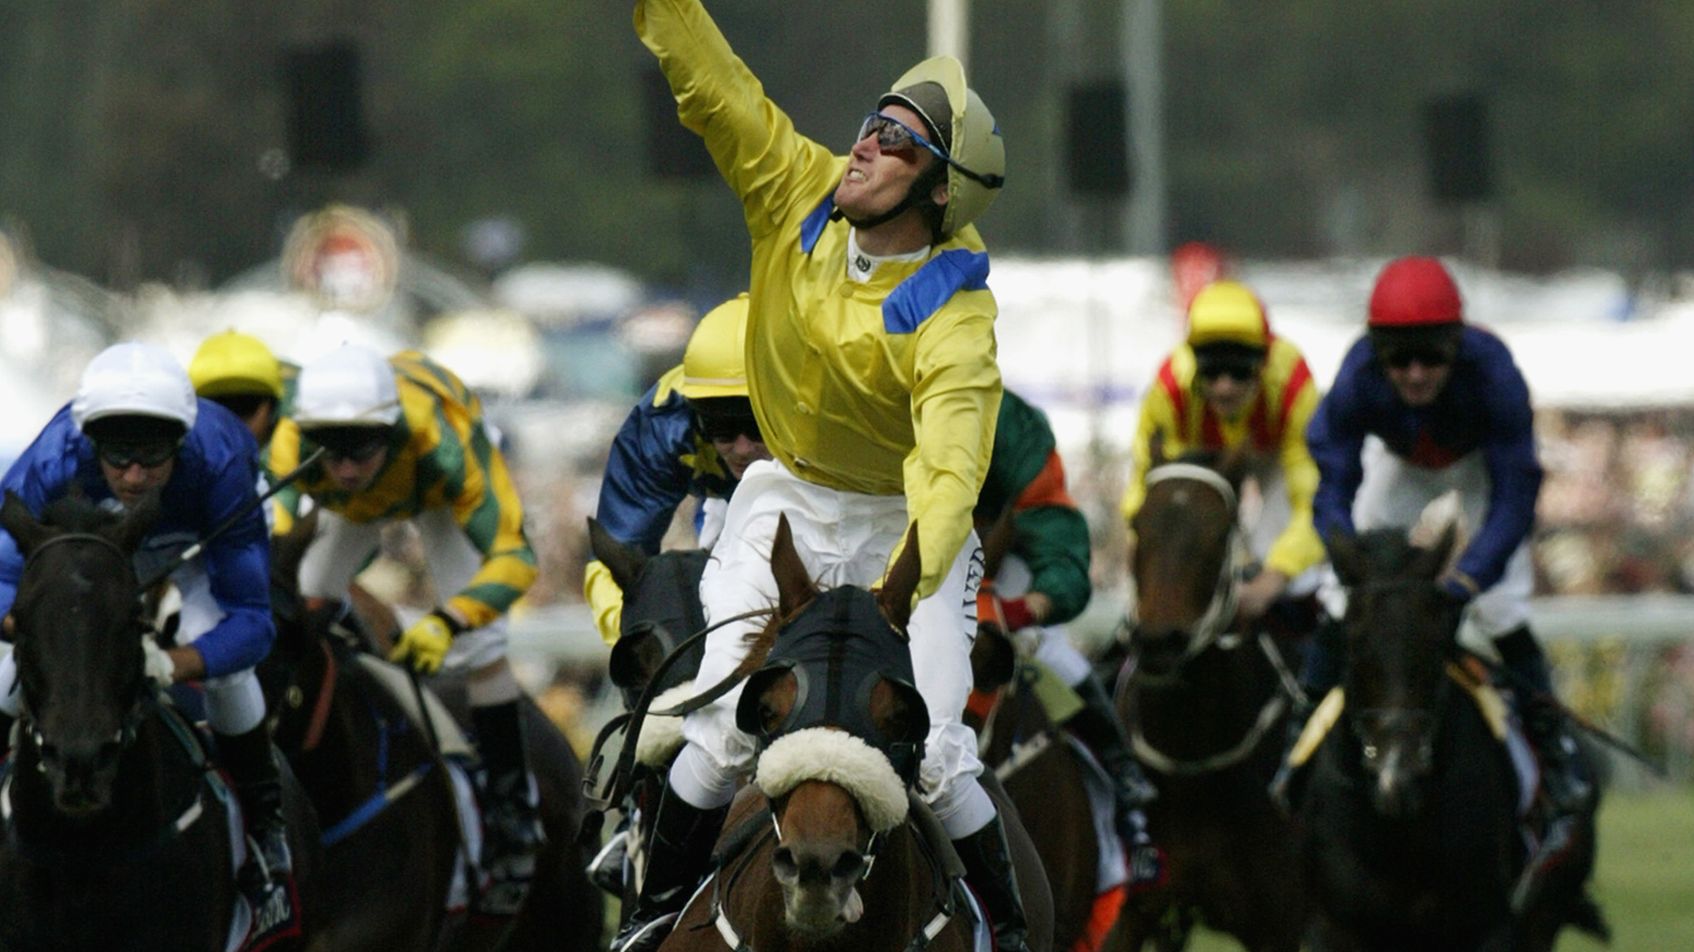 MELBOURNE - NOVEMBER 5:  Damien Oliver celebrates on &#x27;Media Puzzle&#x27; after winning the 2002 Tooheys New Melbourne Cup at Flemington Racecourse in Melbourne, Australia on November 5, 2002. (Photo by Adam Pretty/Getty Images)